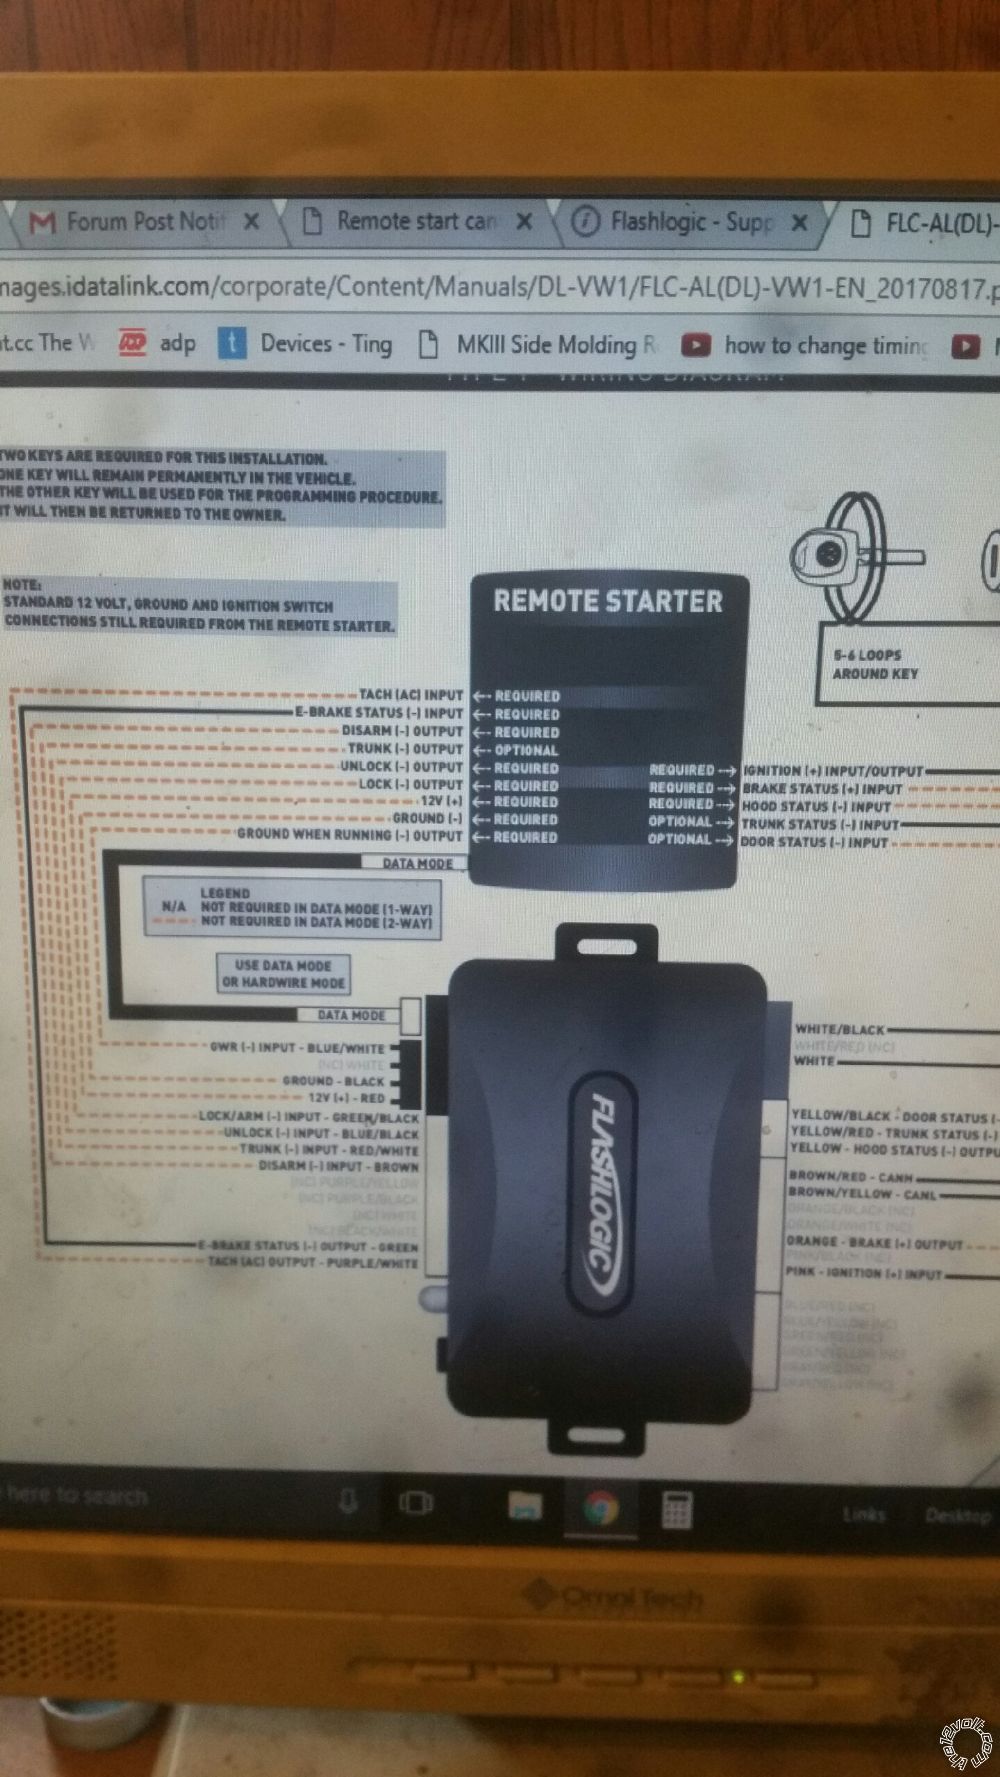 Remote start cant change settings? - Page 2 -- posted image.